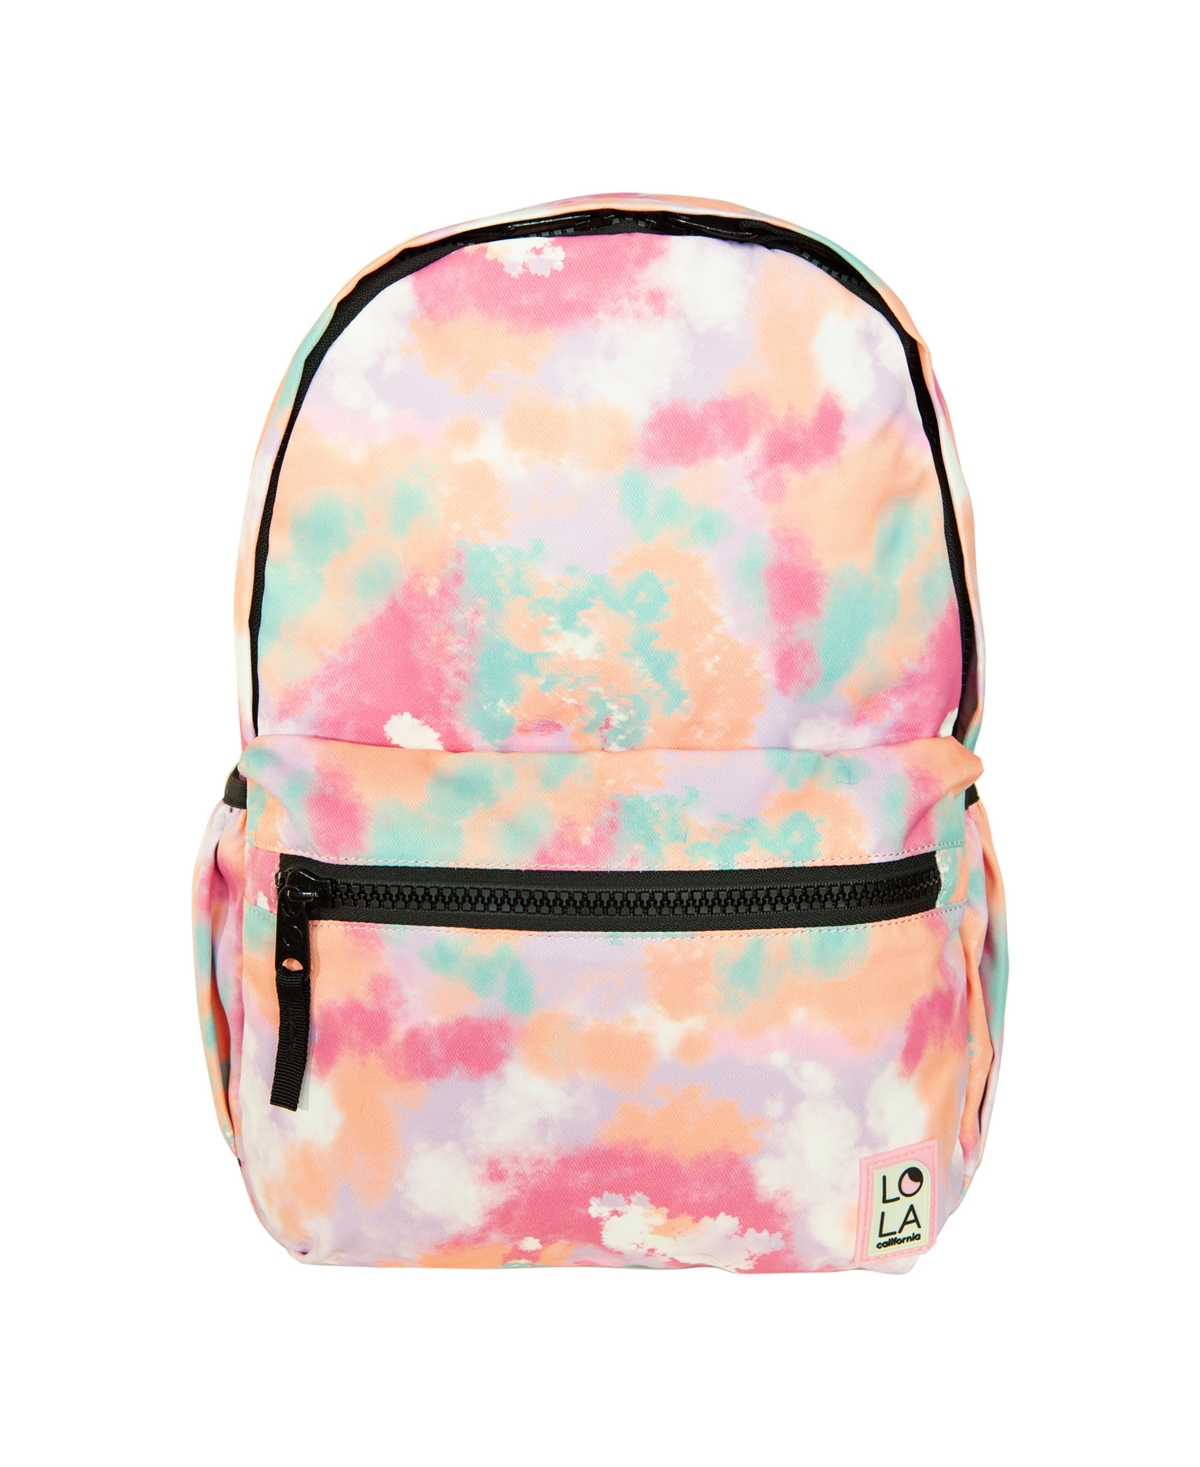 Lola Women's California Small Backpack In Blossom